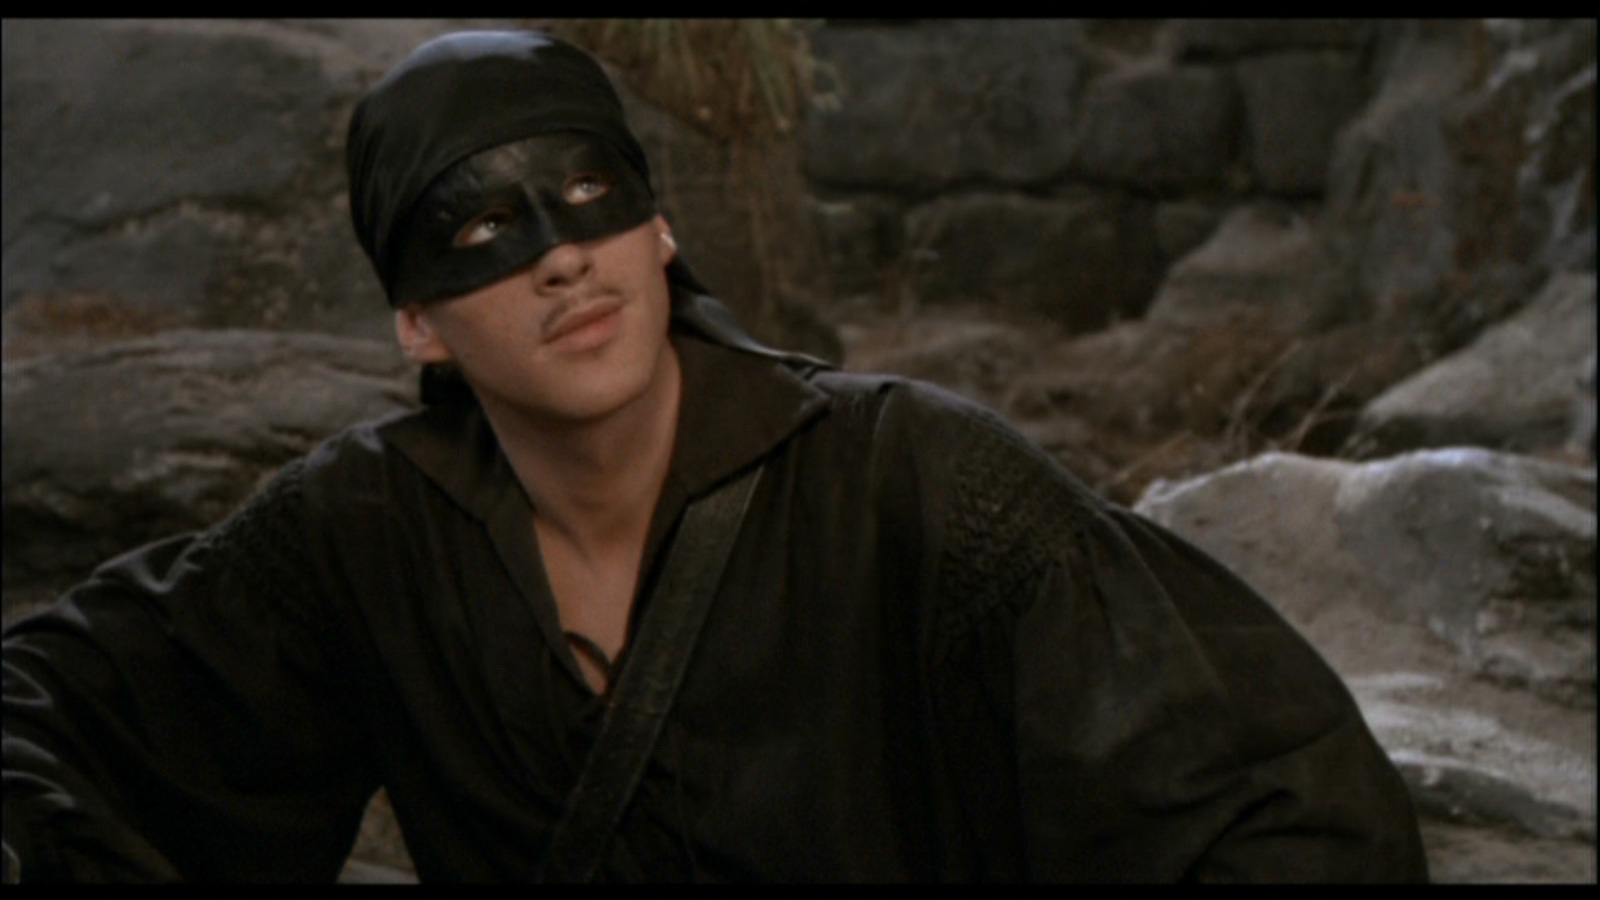 Movie Mondays: 5 Lessons in Business Success from the Princess Bride